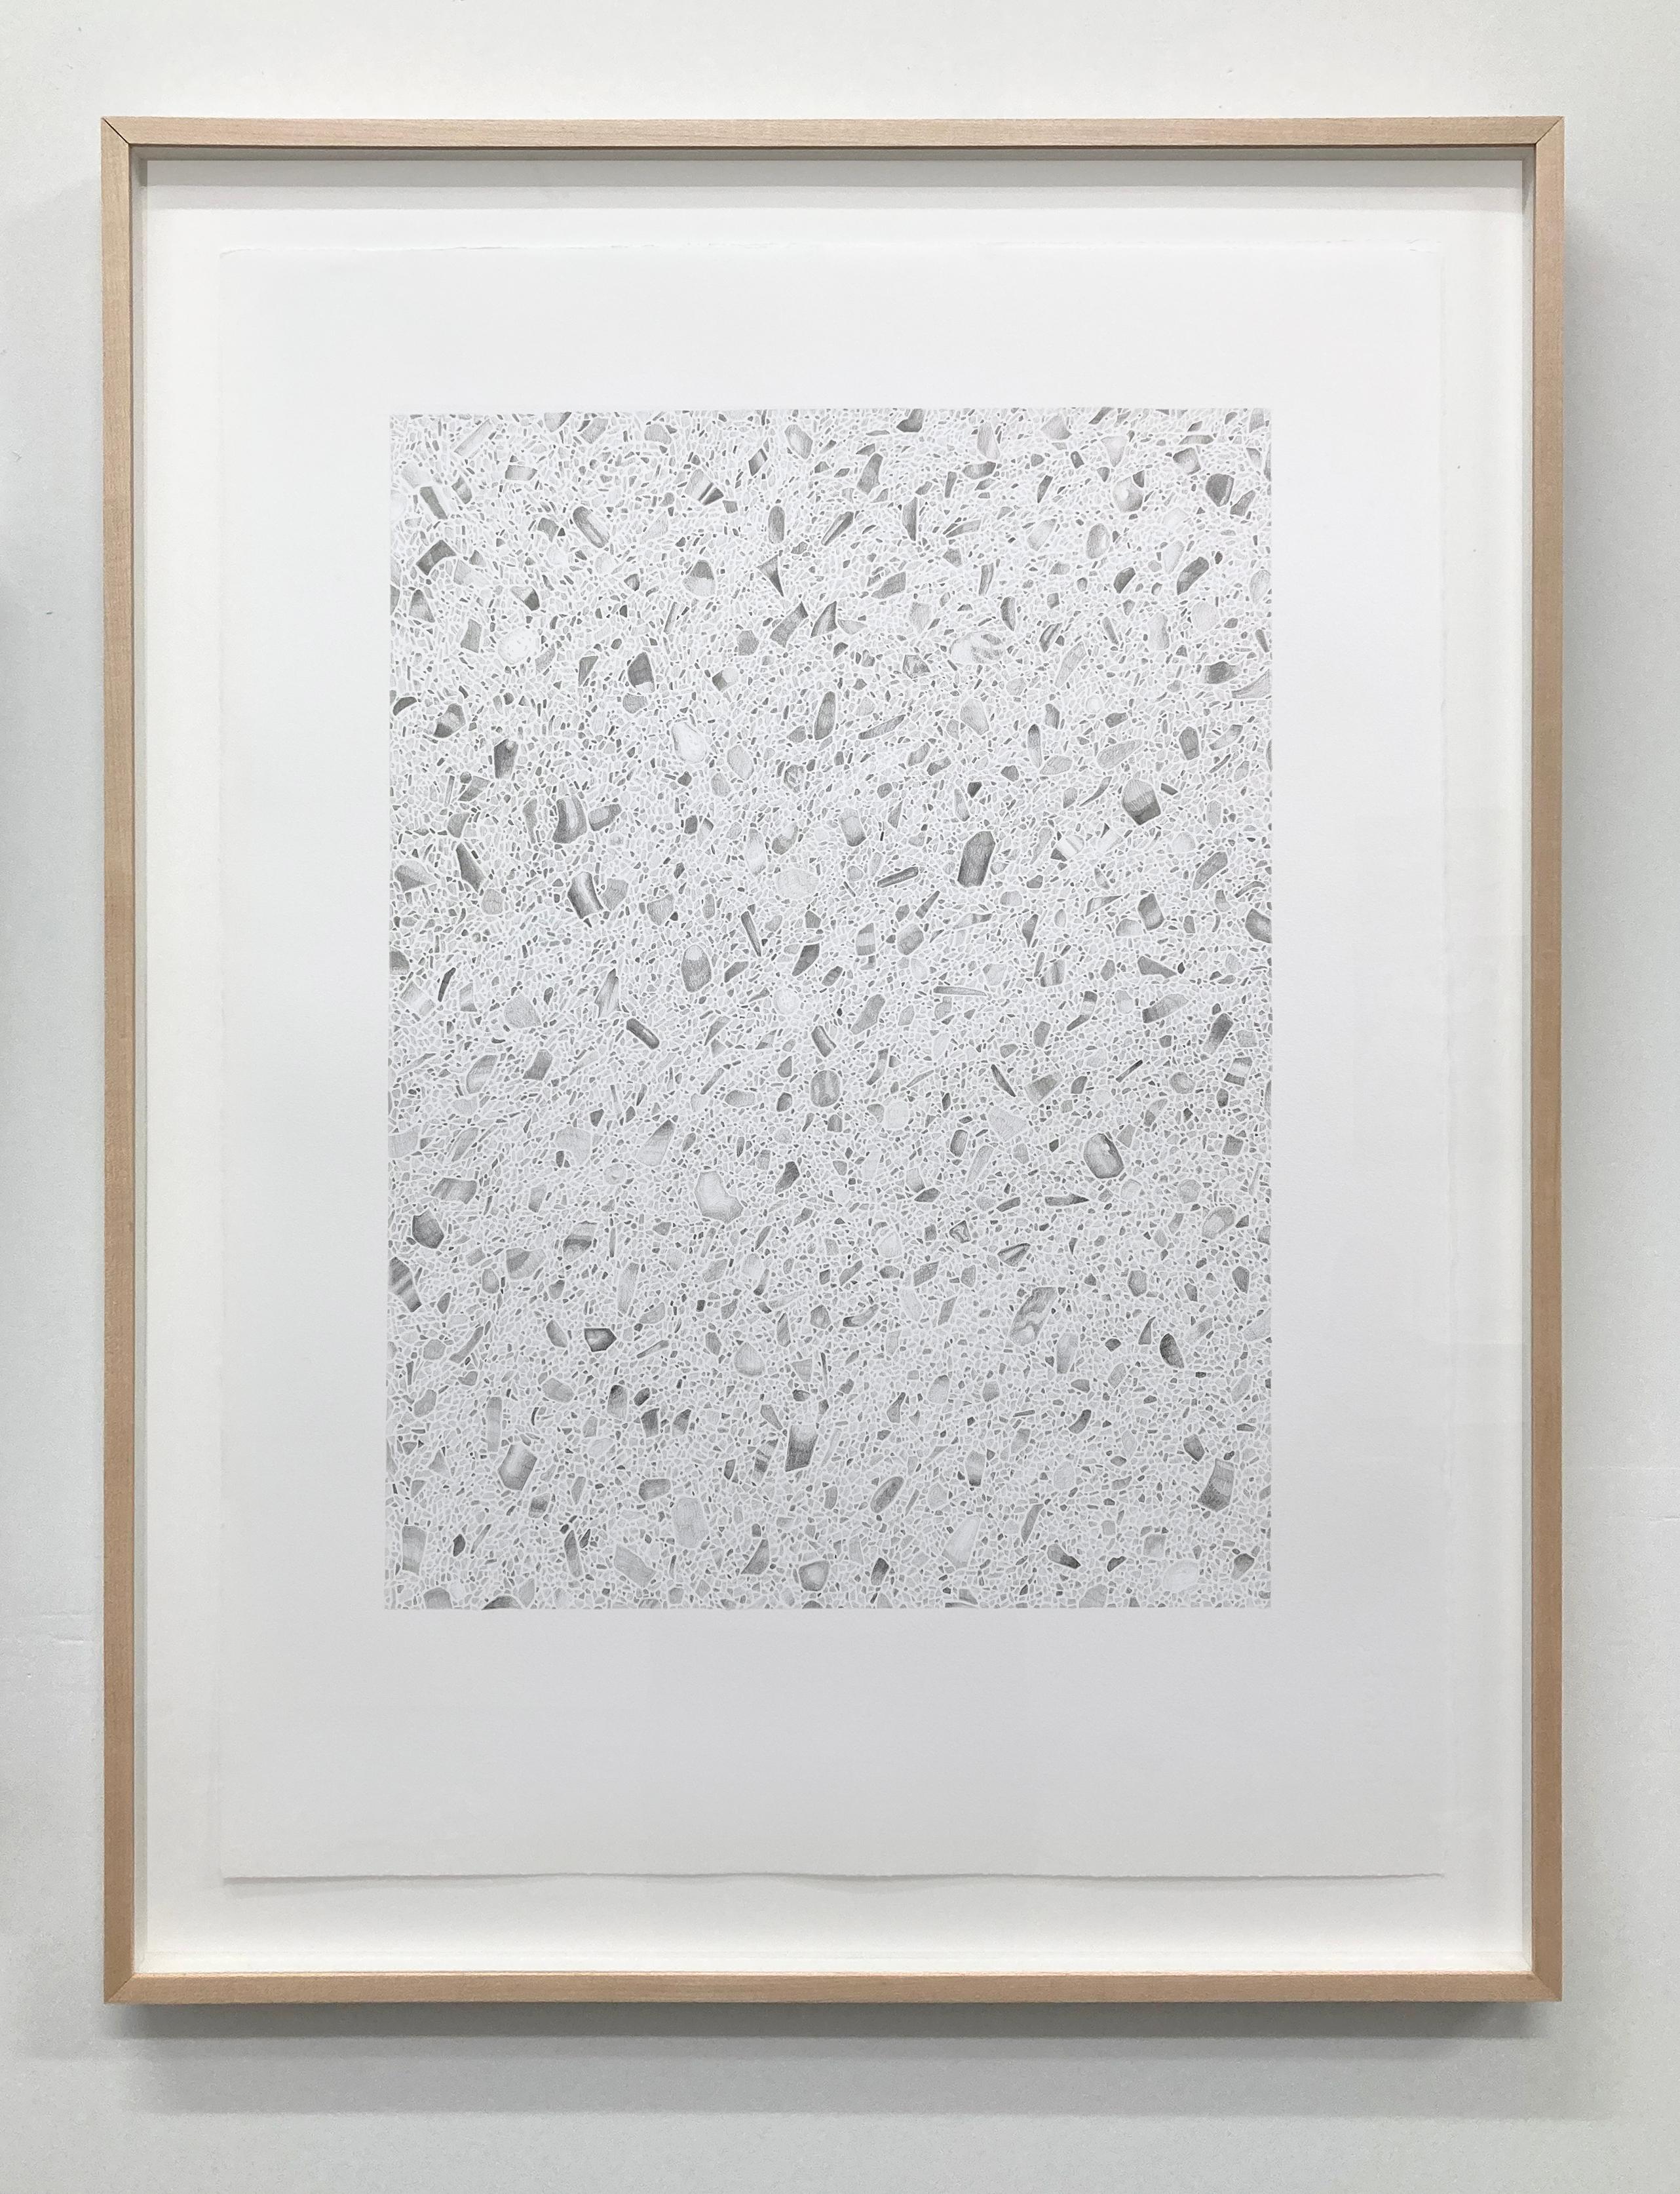 Lucía Rodríguez Pérez Abstract Drawing - Abstract stone drawing, hyper-realistic and detailed graphite on paper